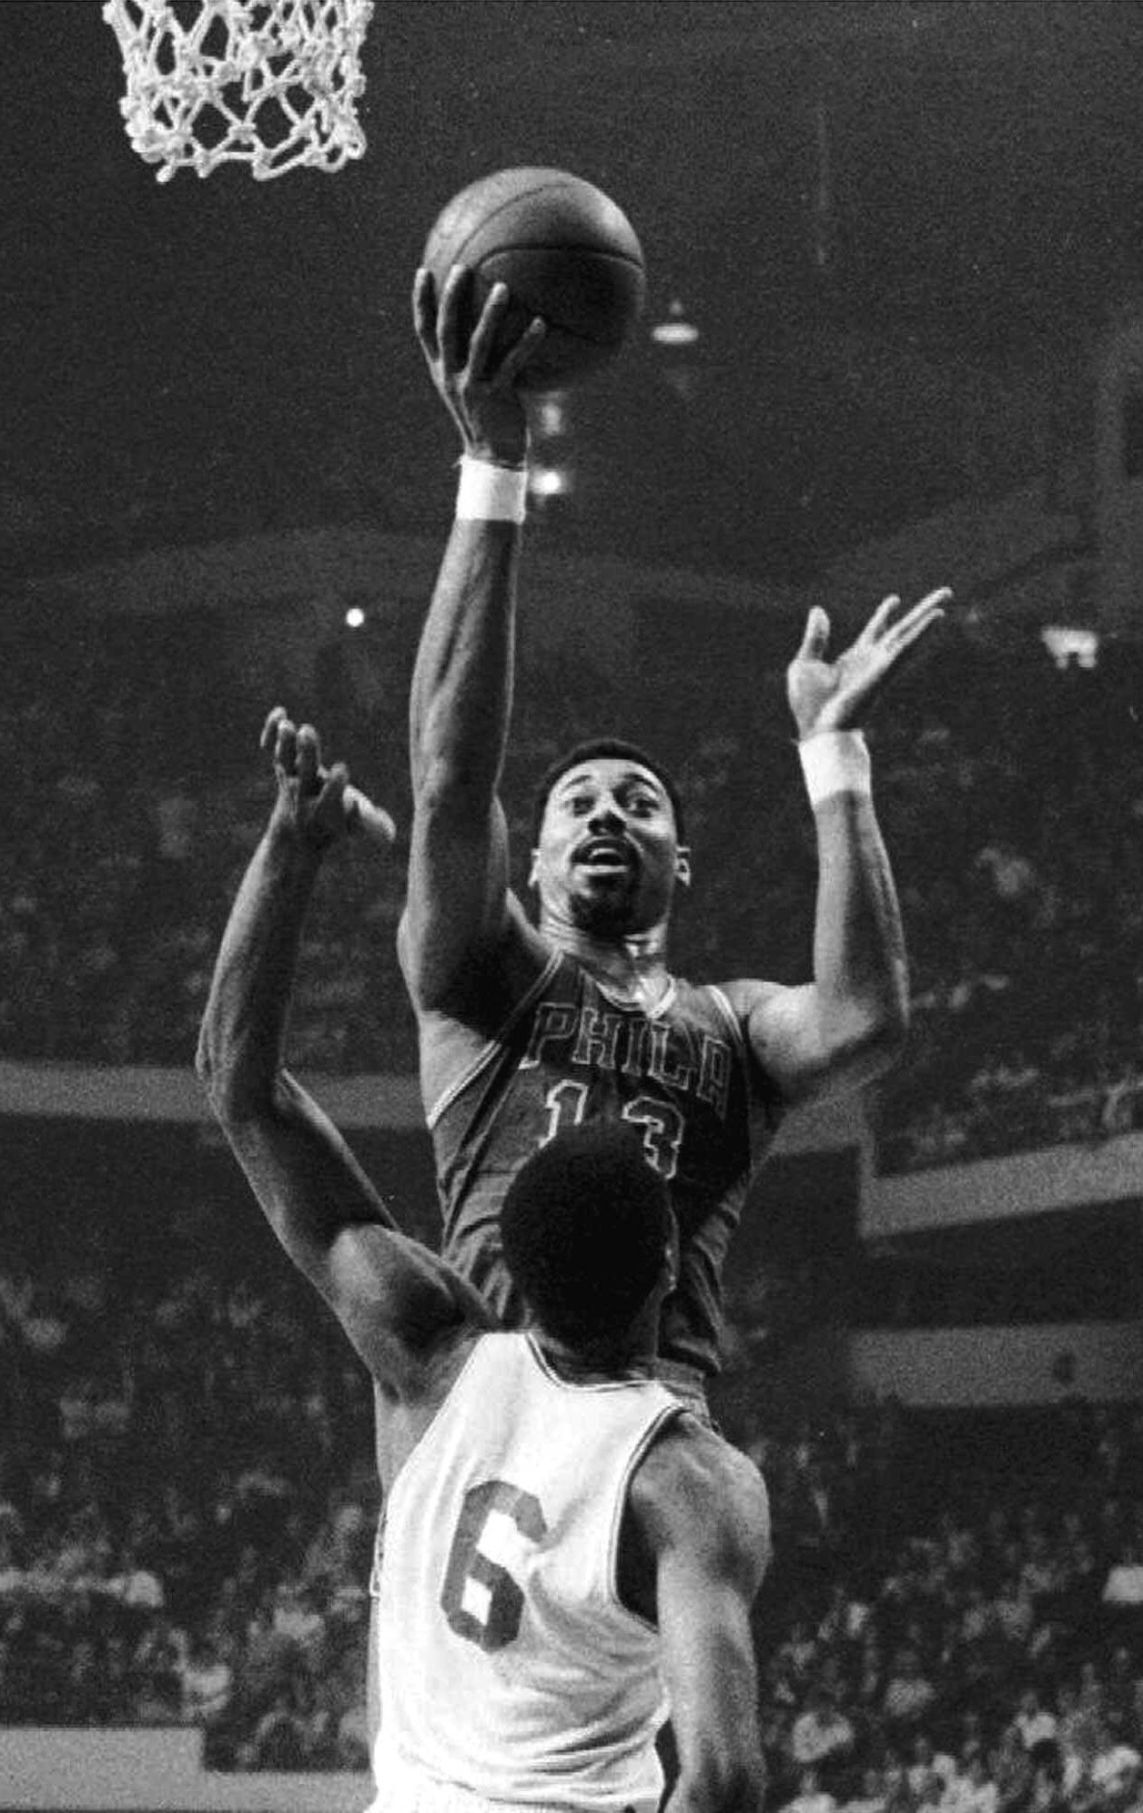 How did Wilt Chamberlain's wingspan set him apart from other NBA players of  his time?